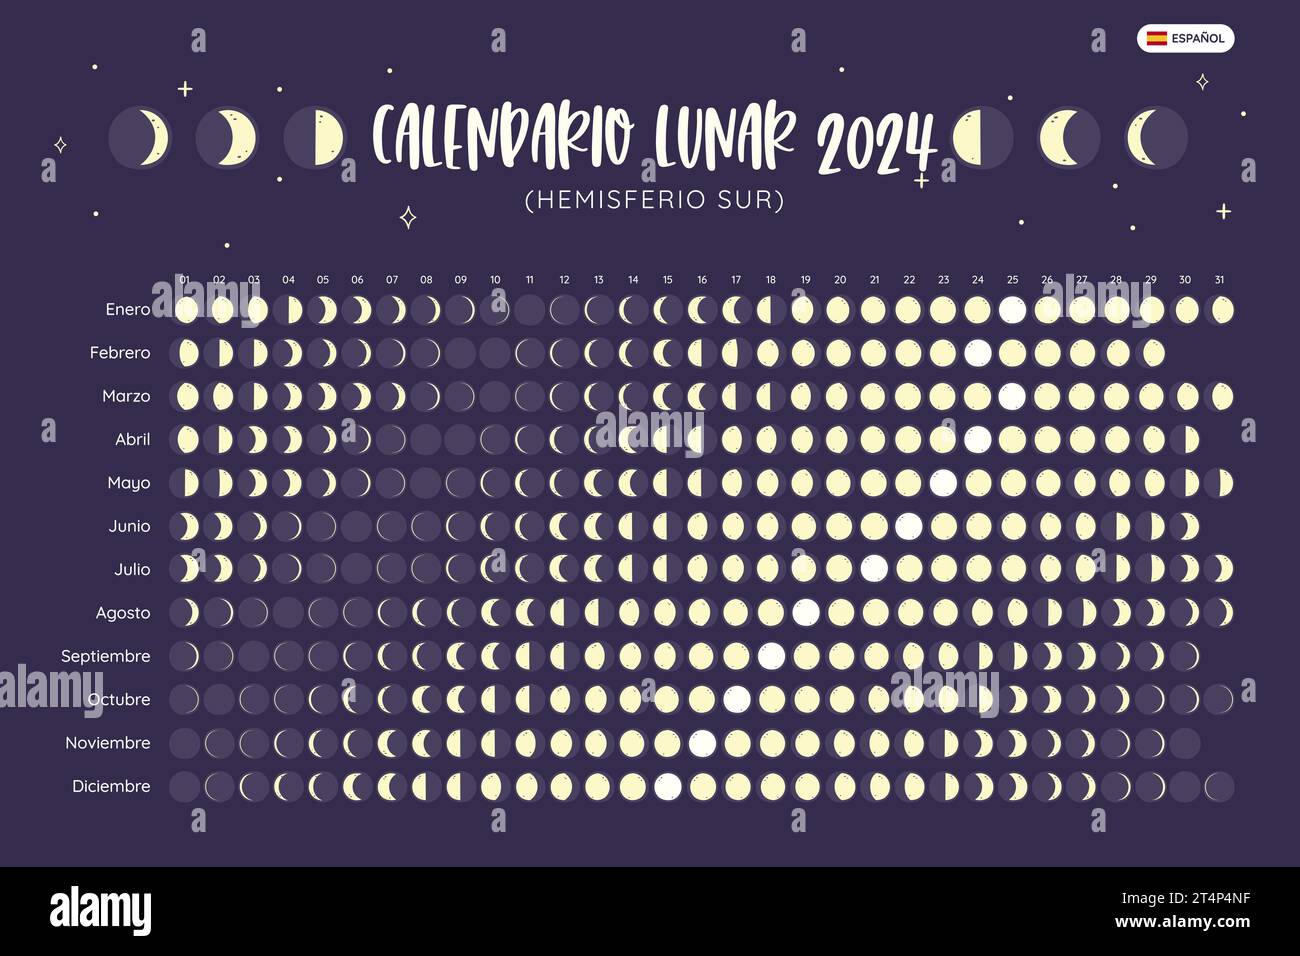 2024 Calendar. Moon phases foreseen from Southern Hemisphere. Spanish Text. Year view calendar. EPS Vector. No editable text. Stock Vector